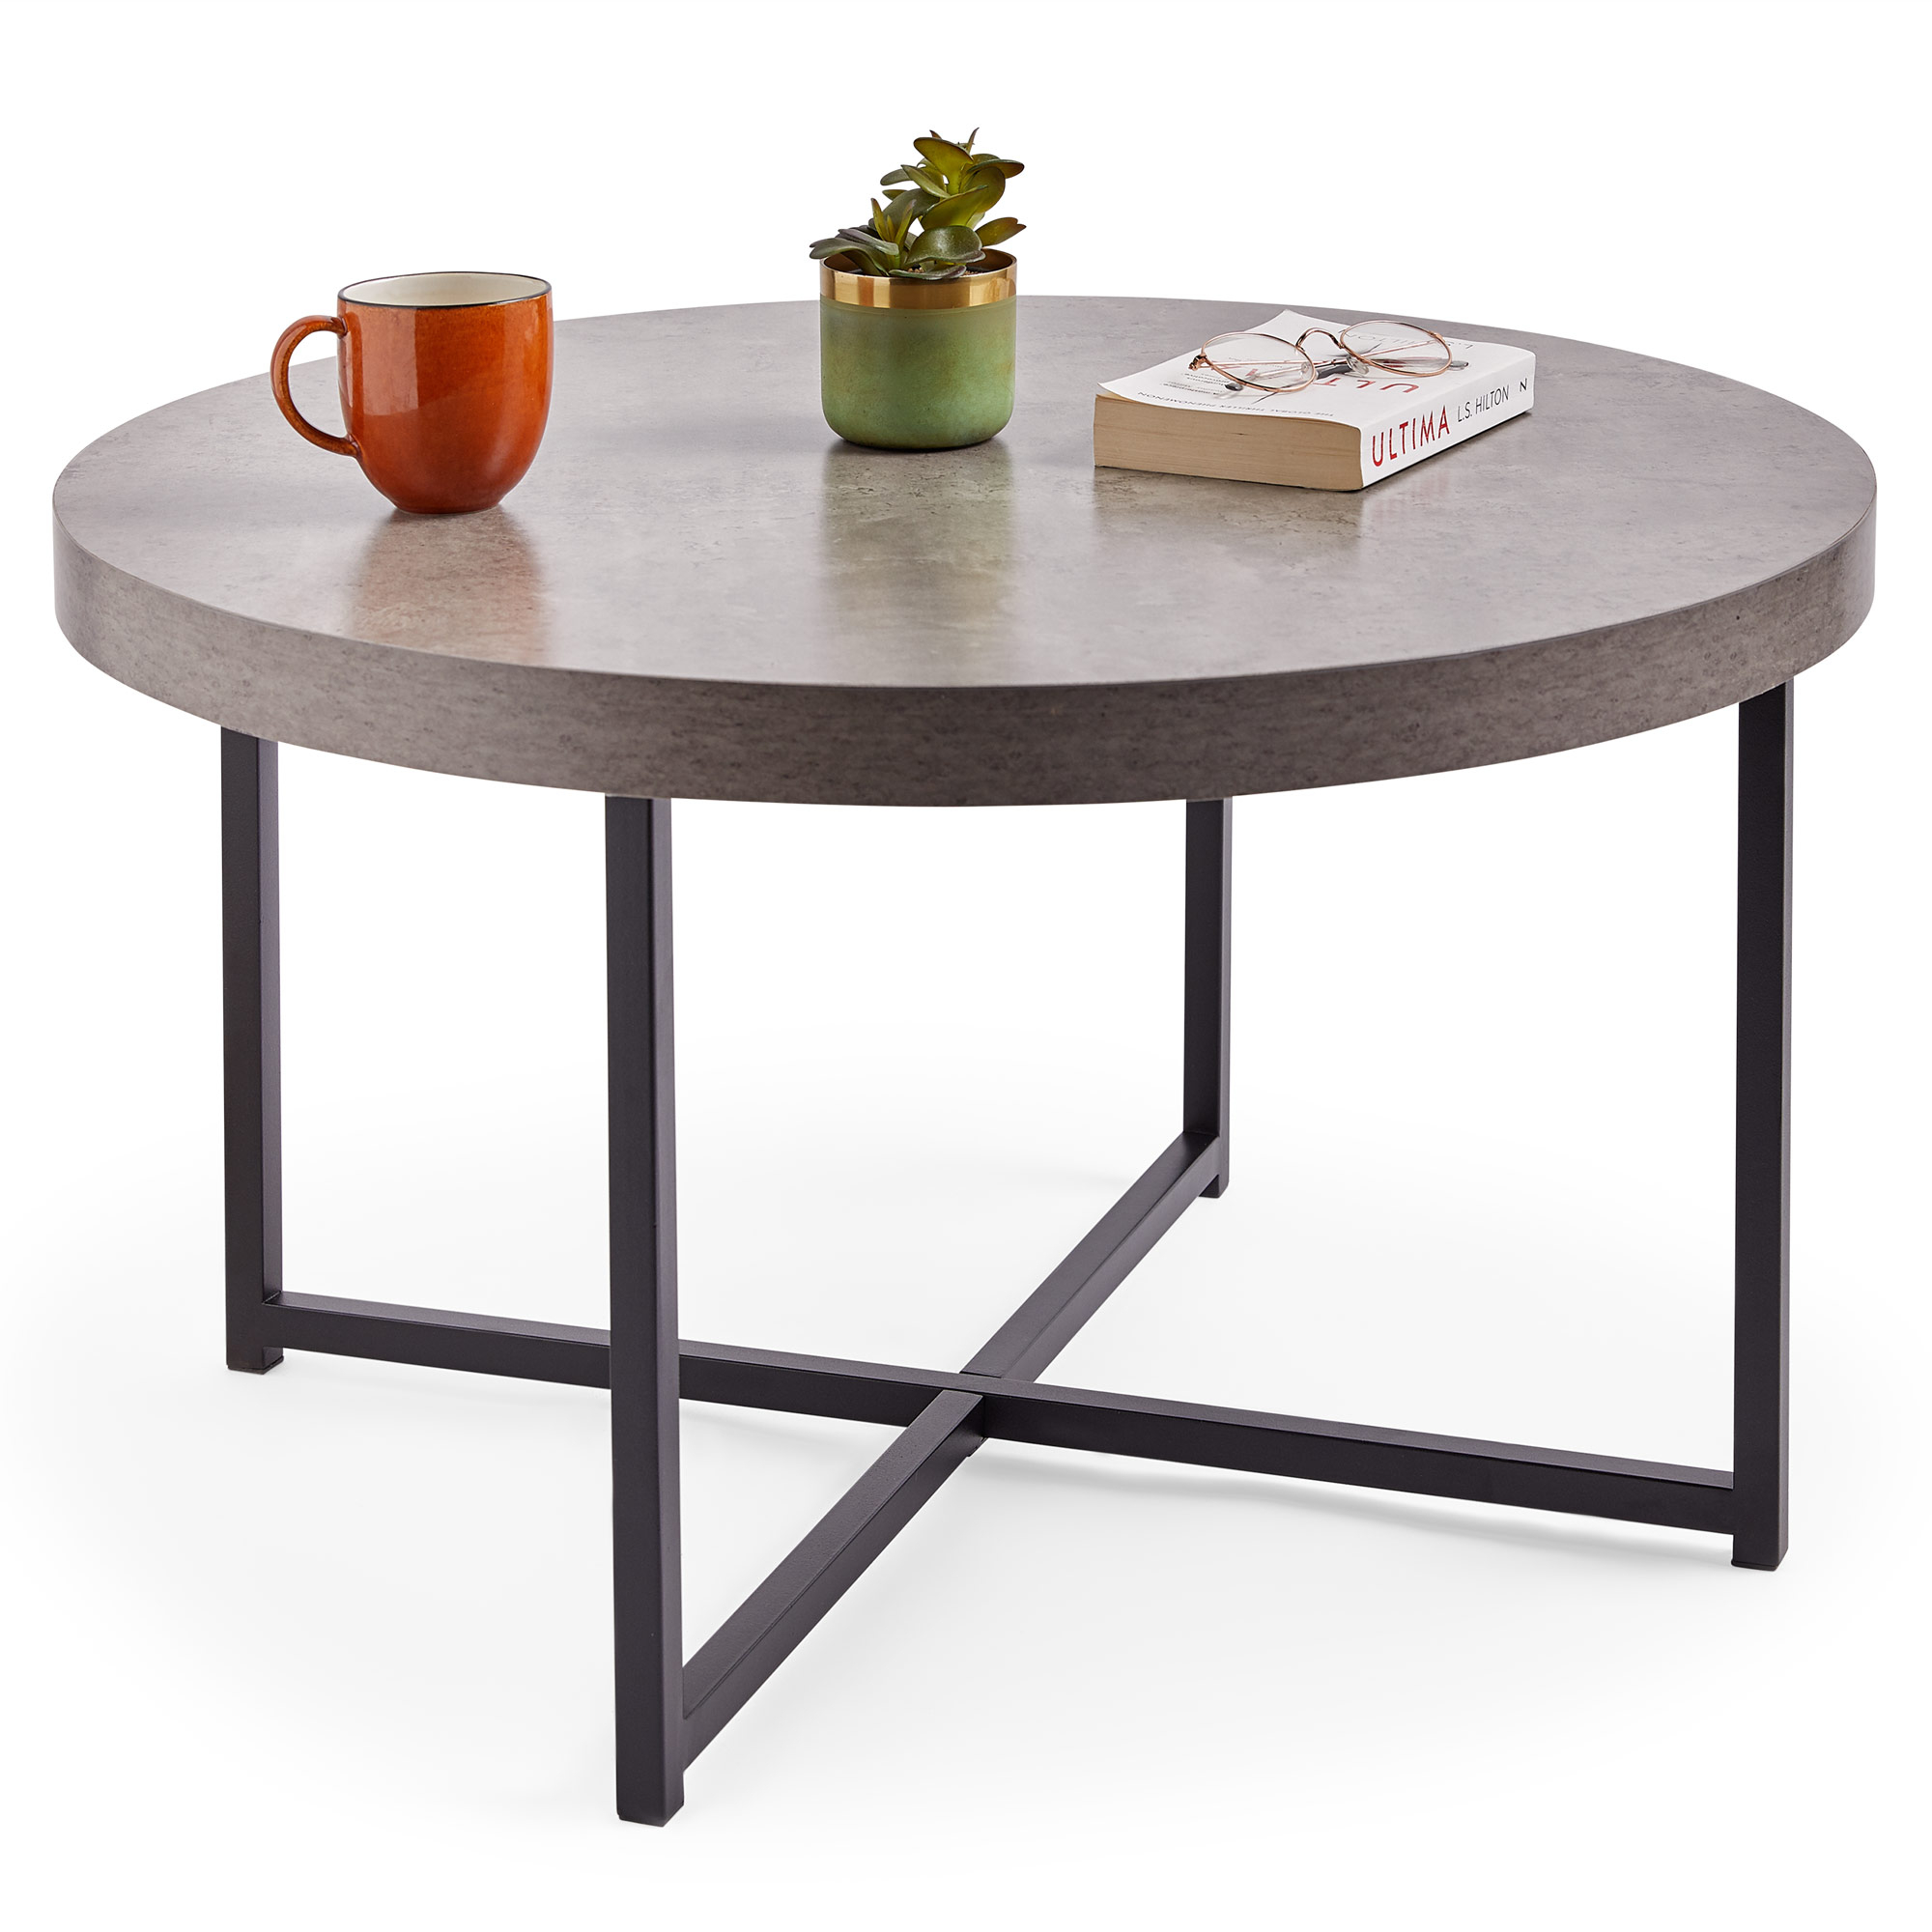 VonHaus Concrete-Look Coffee Table – Contemporary Style with Lightweight Metal-Effect Legs